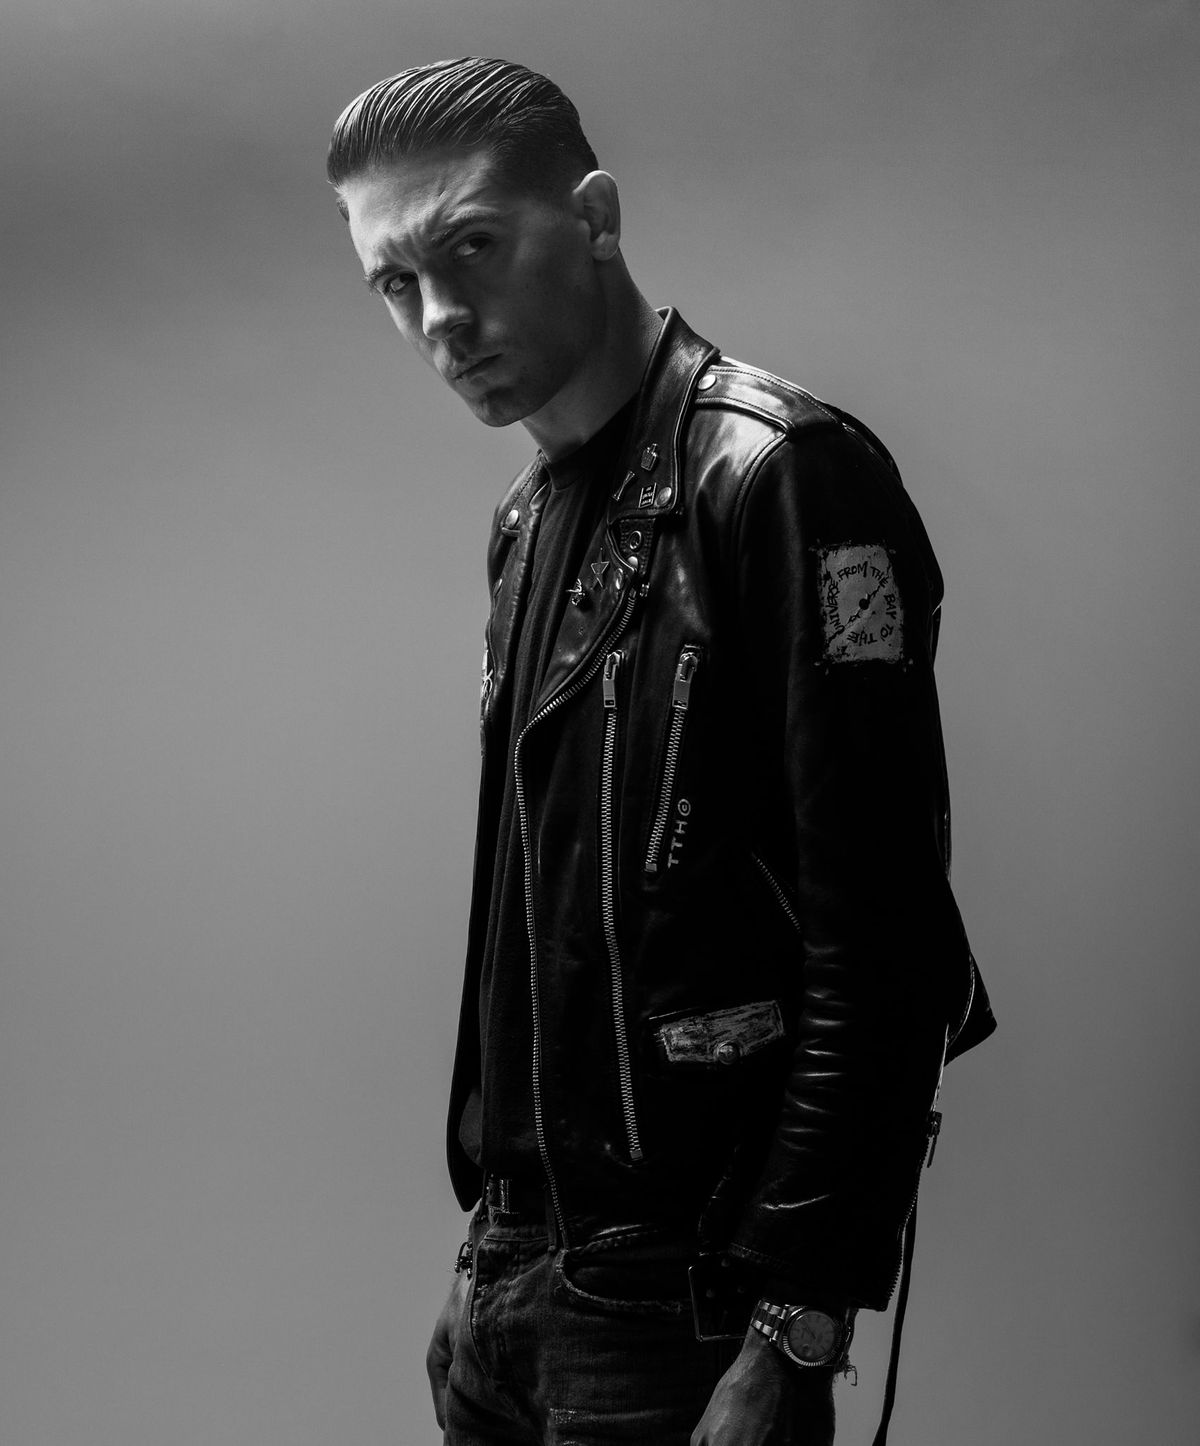 G-Eazy - Live featuring Ty Dolla Sign & Lil Uzi Vert